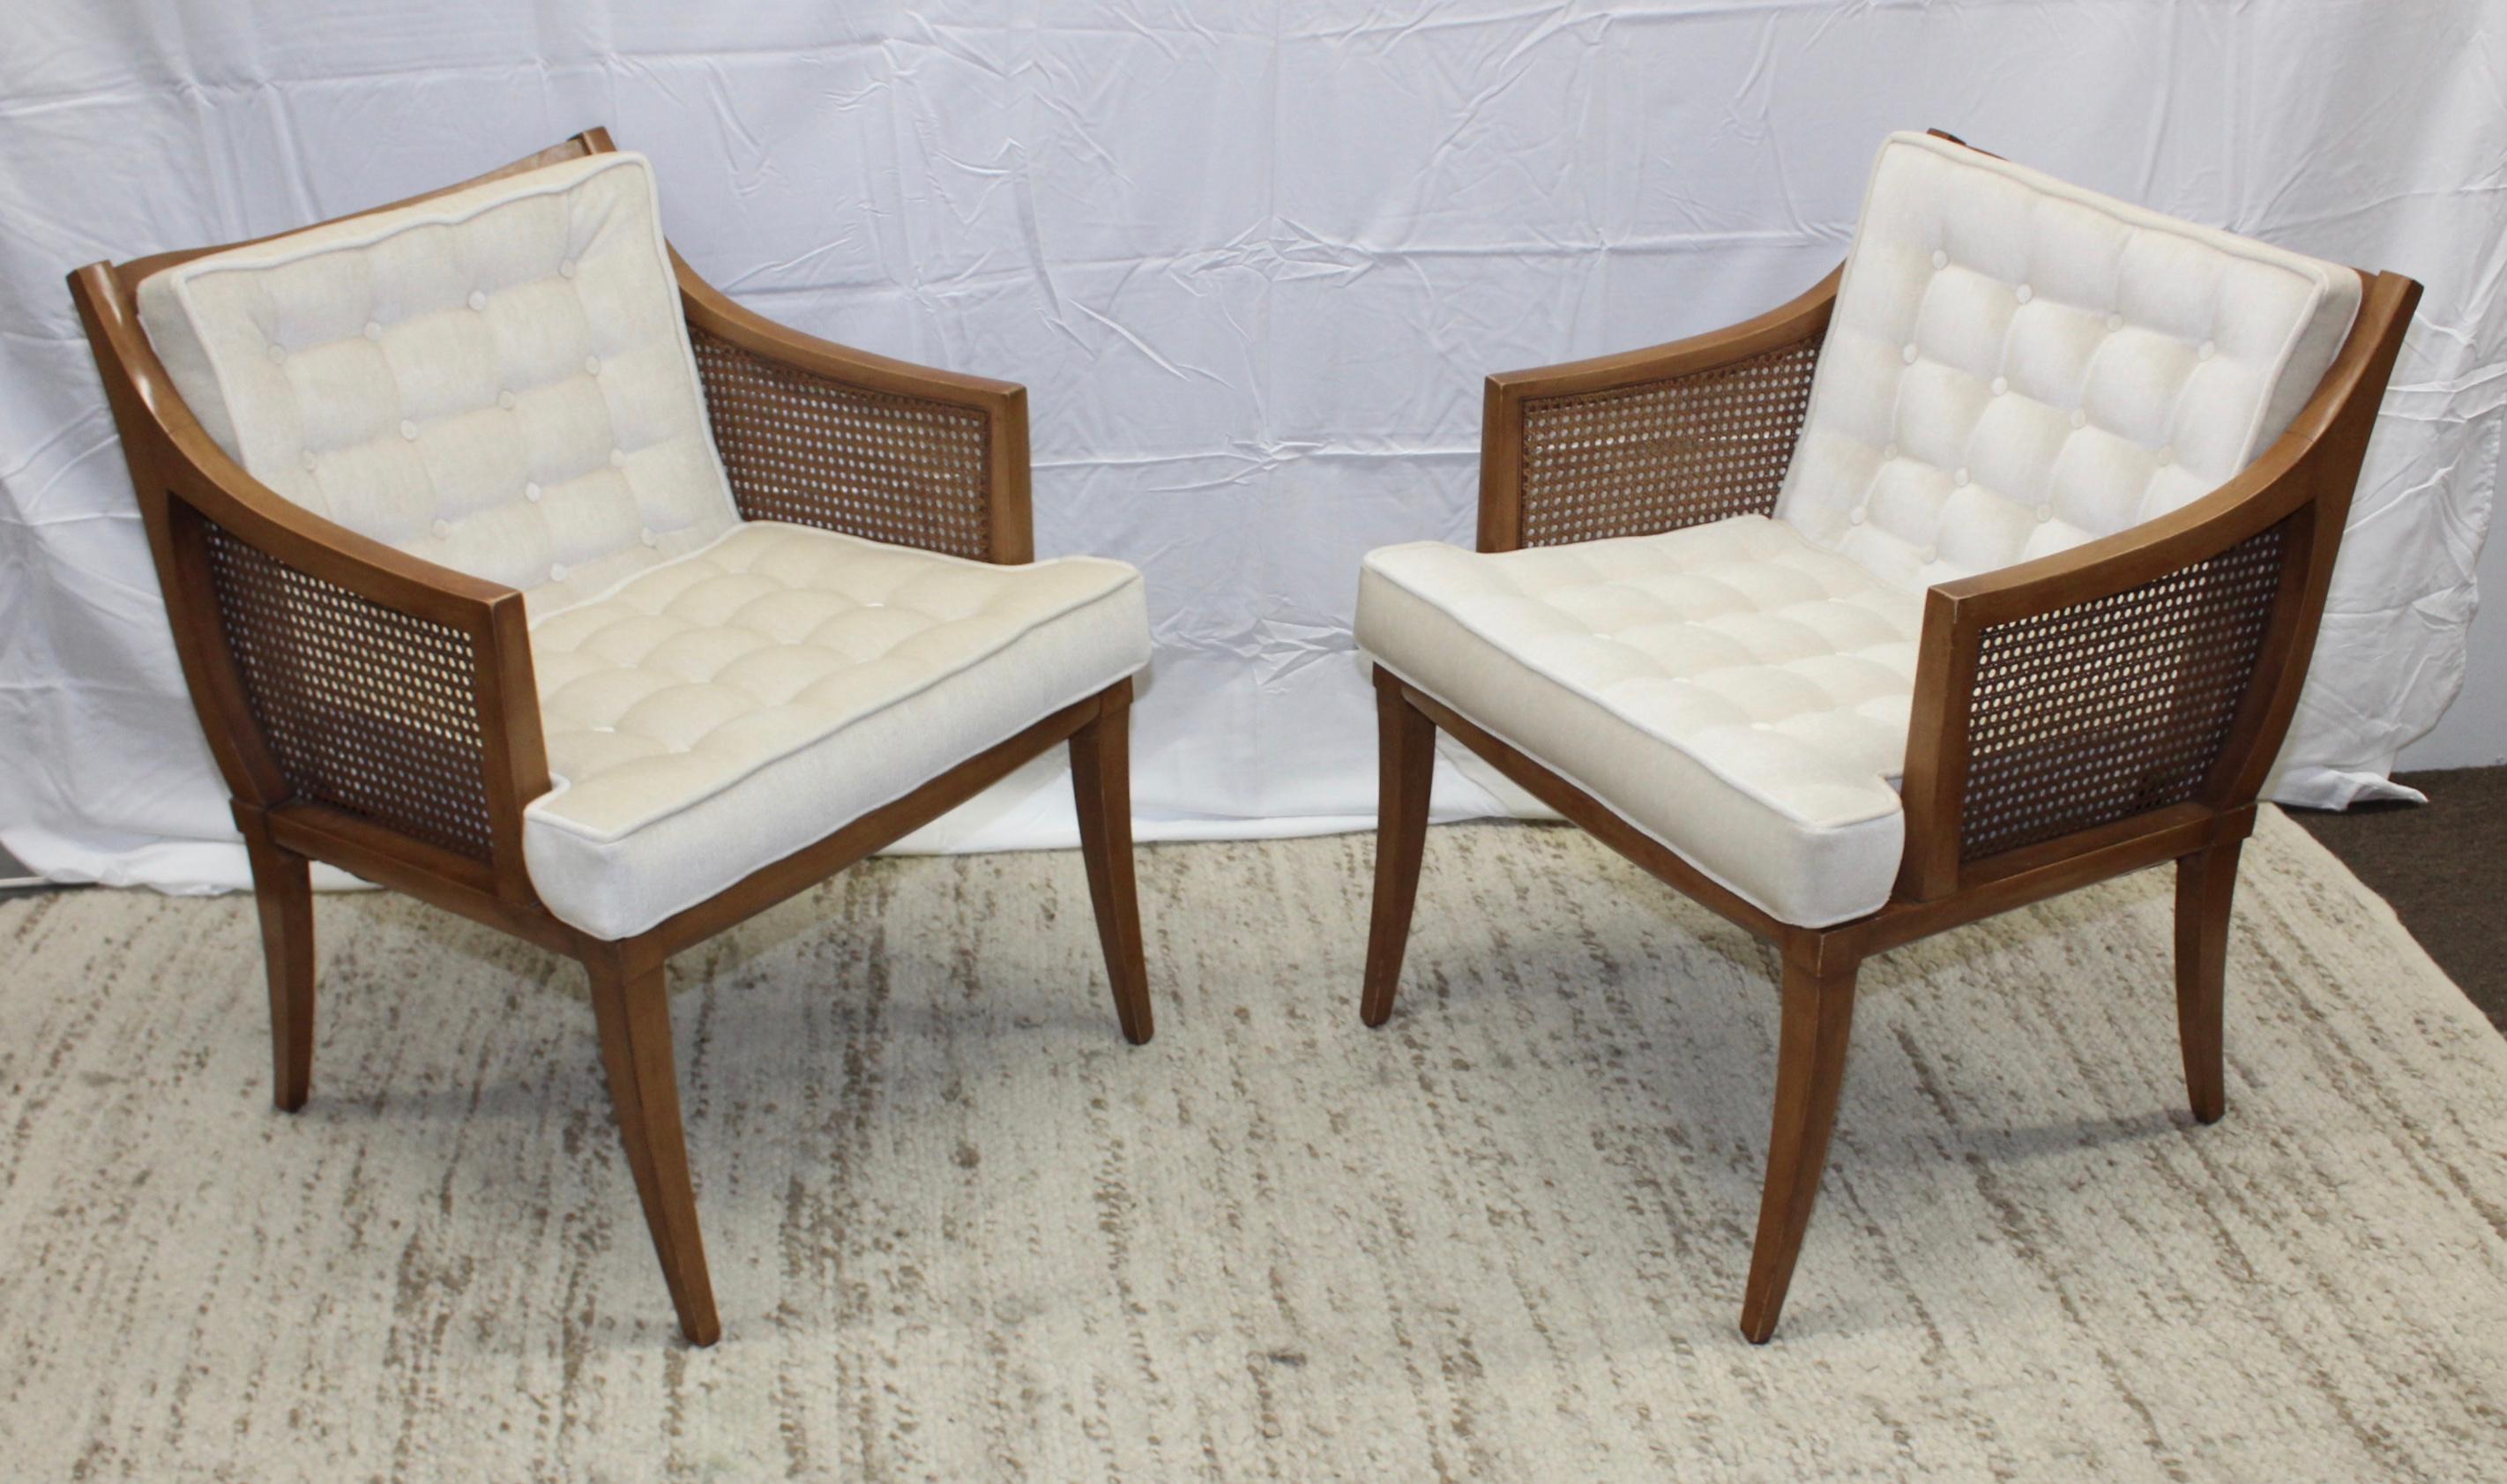 Stunning pair of 1960s Erwin Lambeth designed and manufactured by John Stuart lounge chairs. In vintage original condition, they need new upholstery.